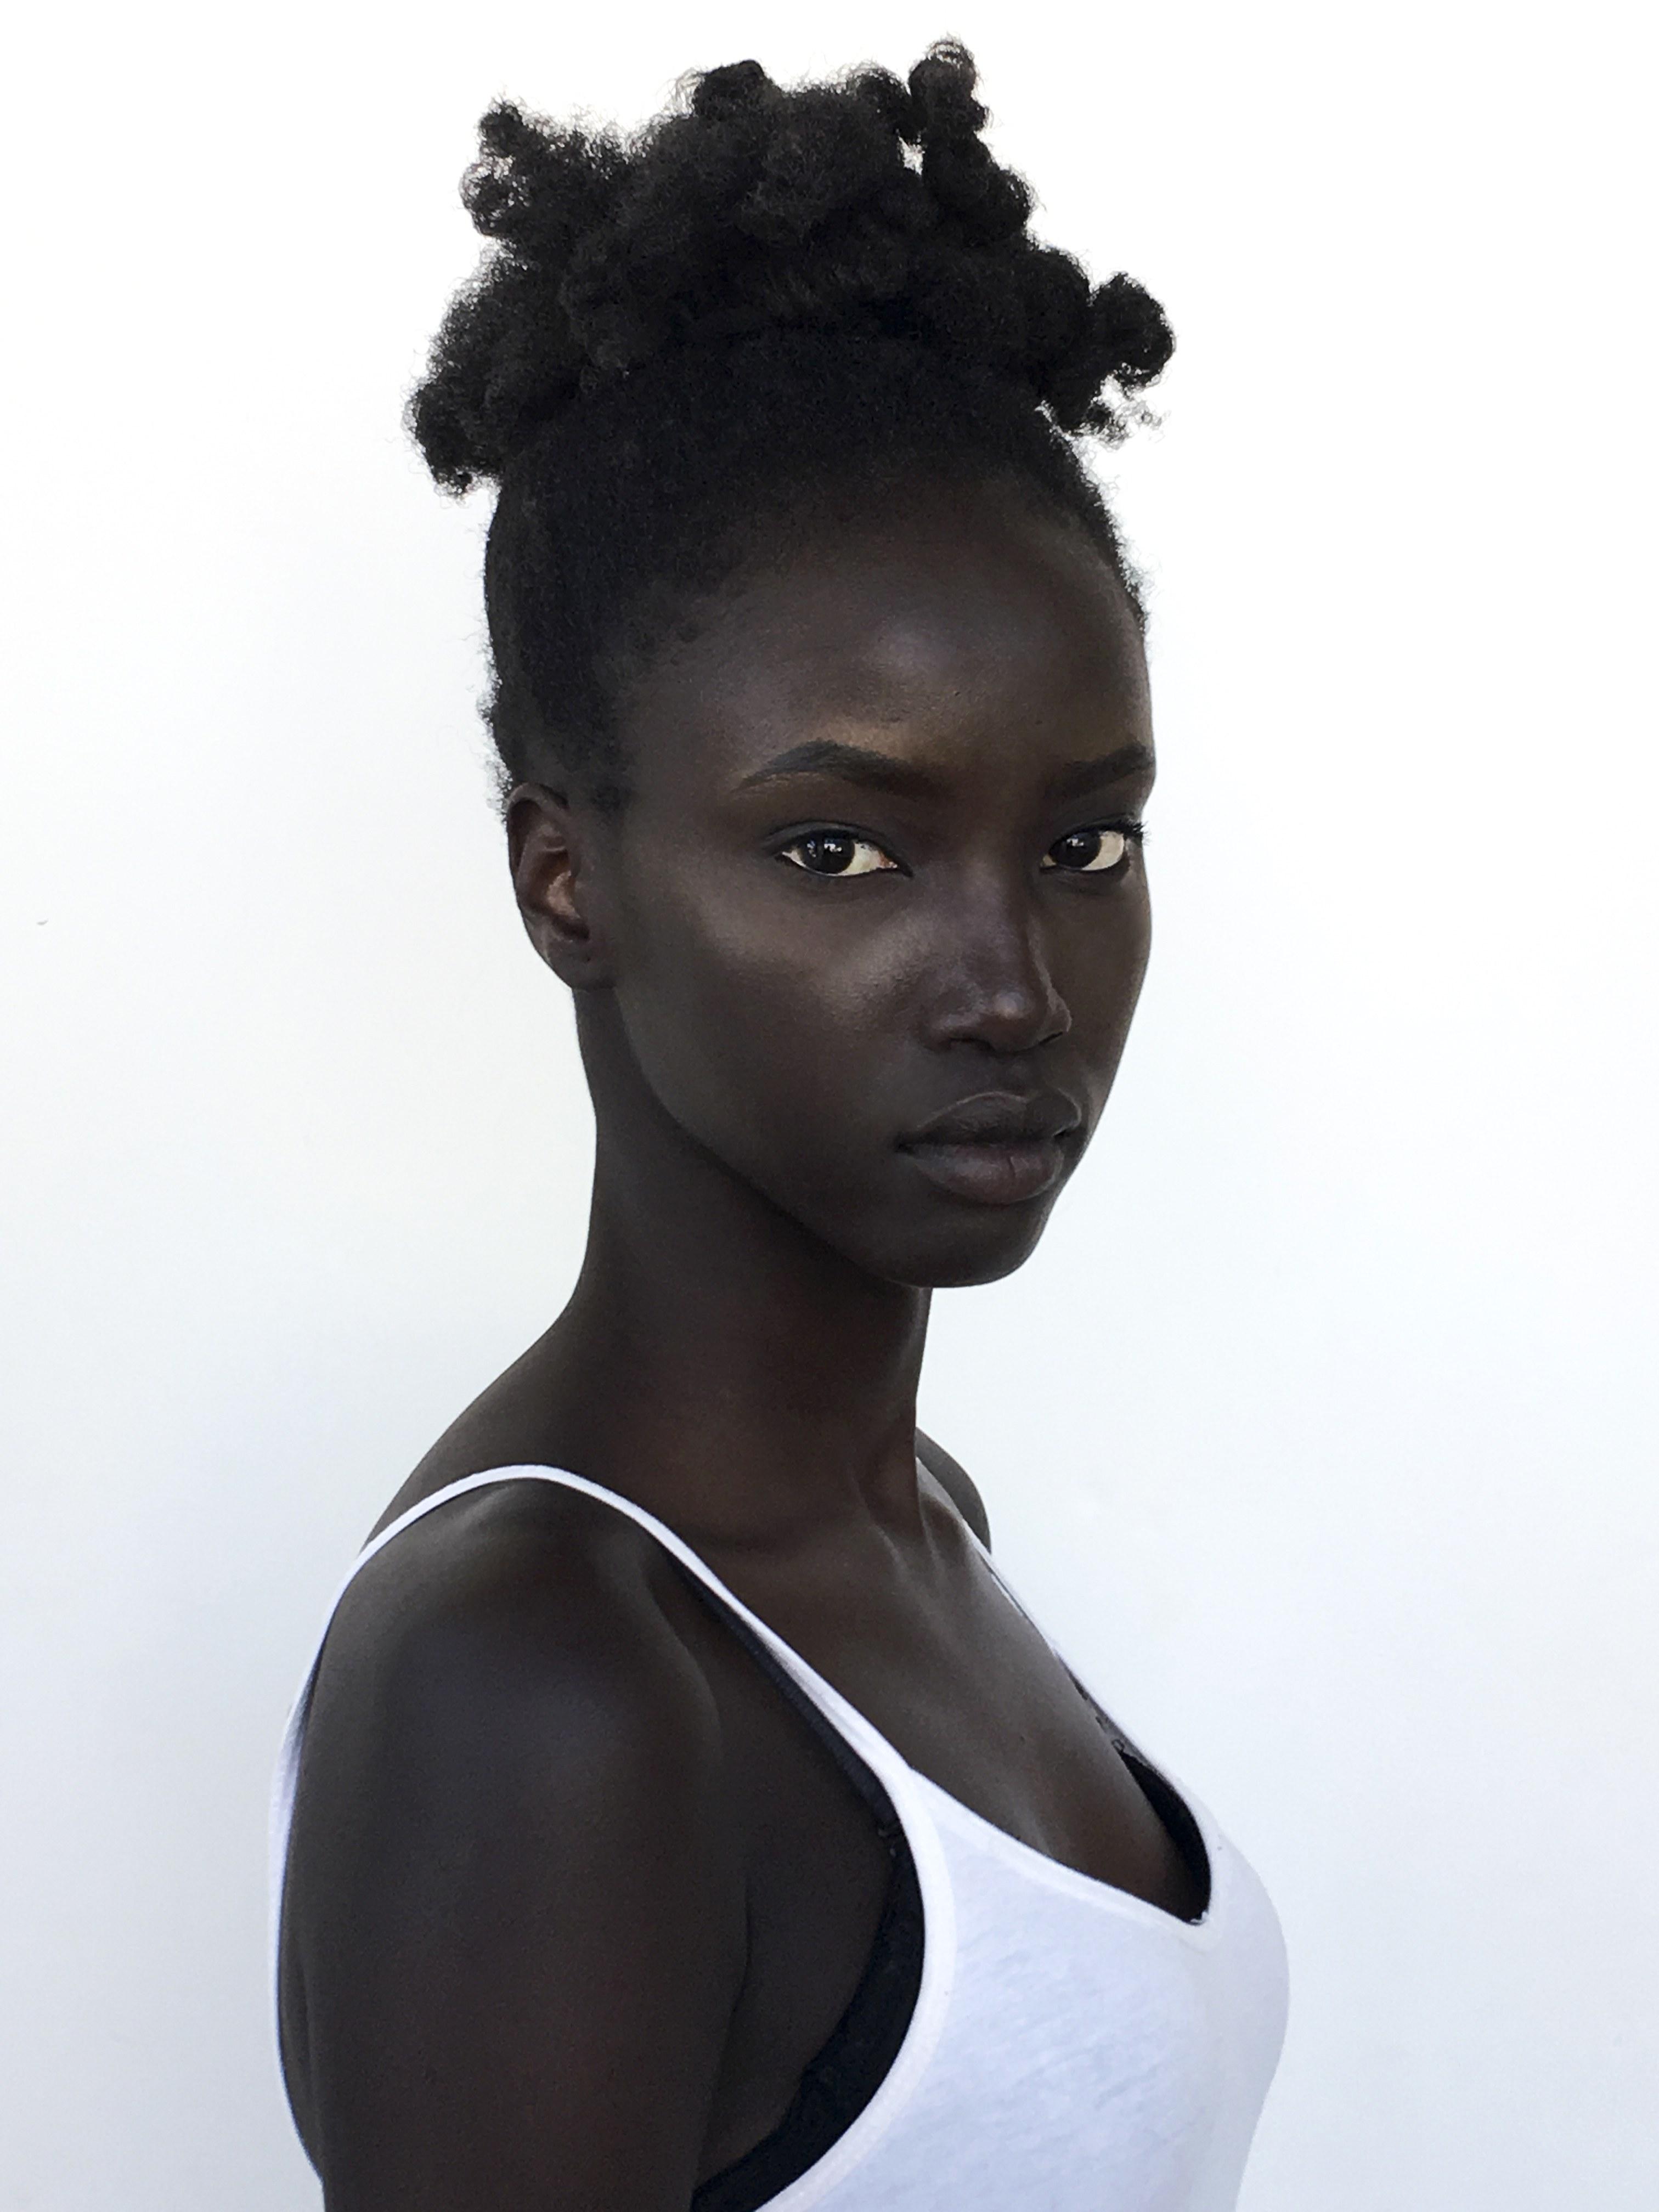 The Sudanese Model Anok Yai on Being Discovered and Inspiring Young